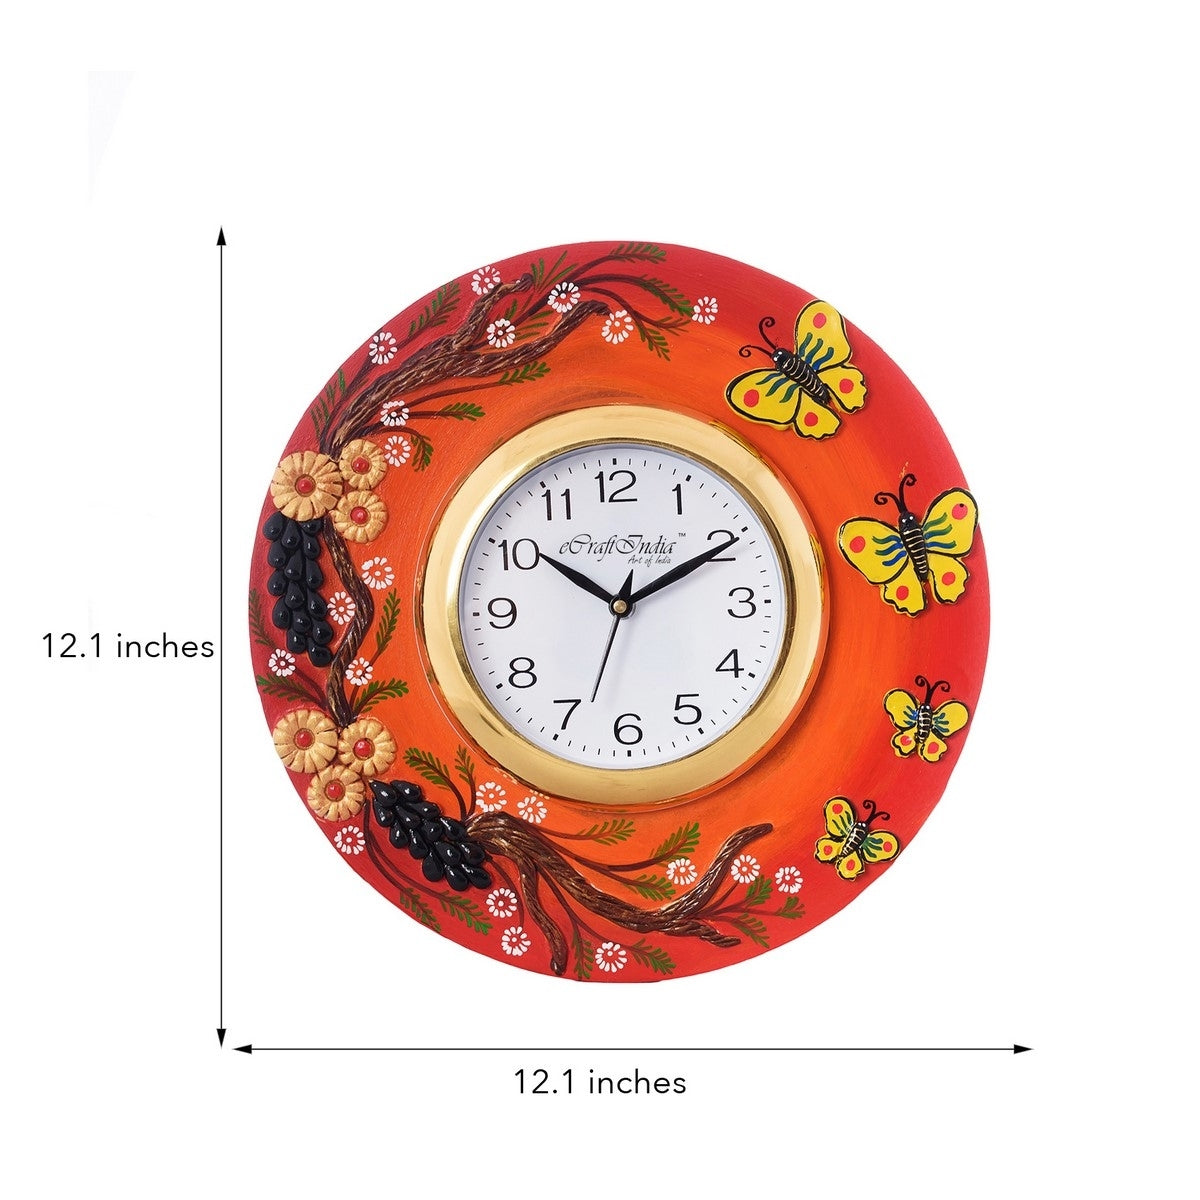 Butterfuly and Garden View Papier-Mache Wooden Handcrafted Wall Clock 2